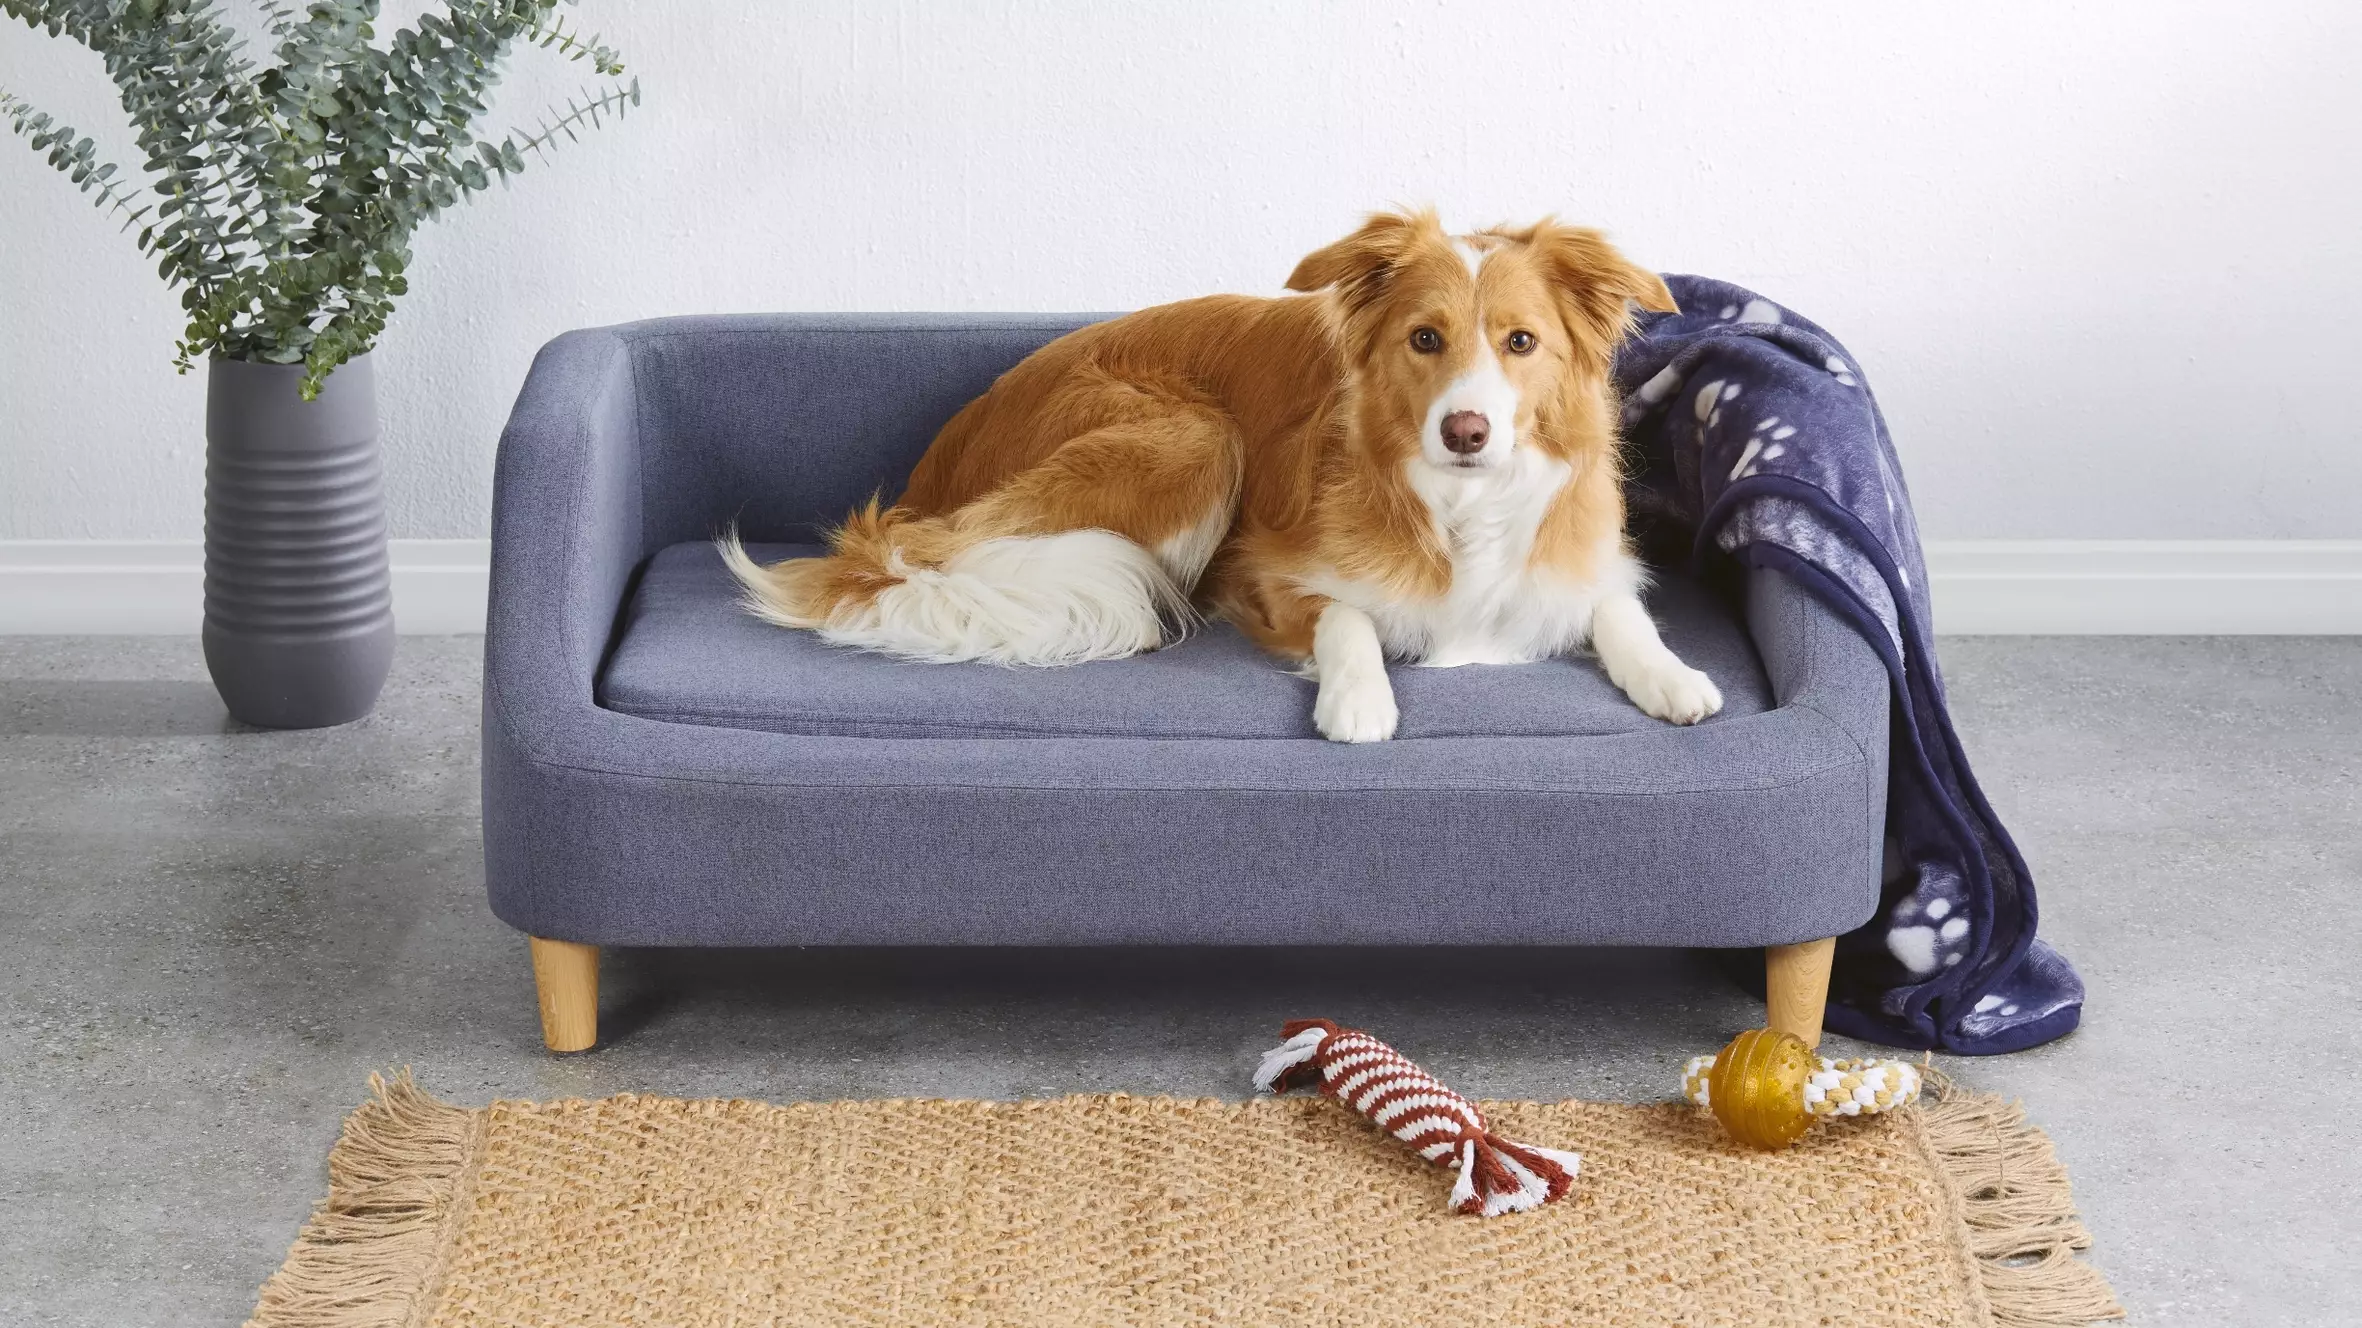 Aldi Australia Is Selling Dog-Sized Couches So That Your Pet Can Stay Off Your Sofa